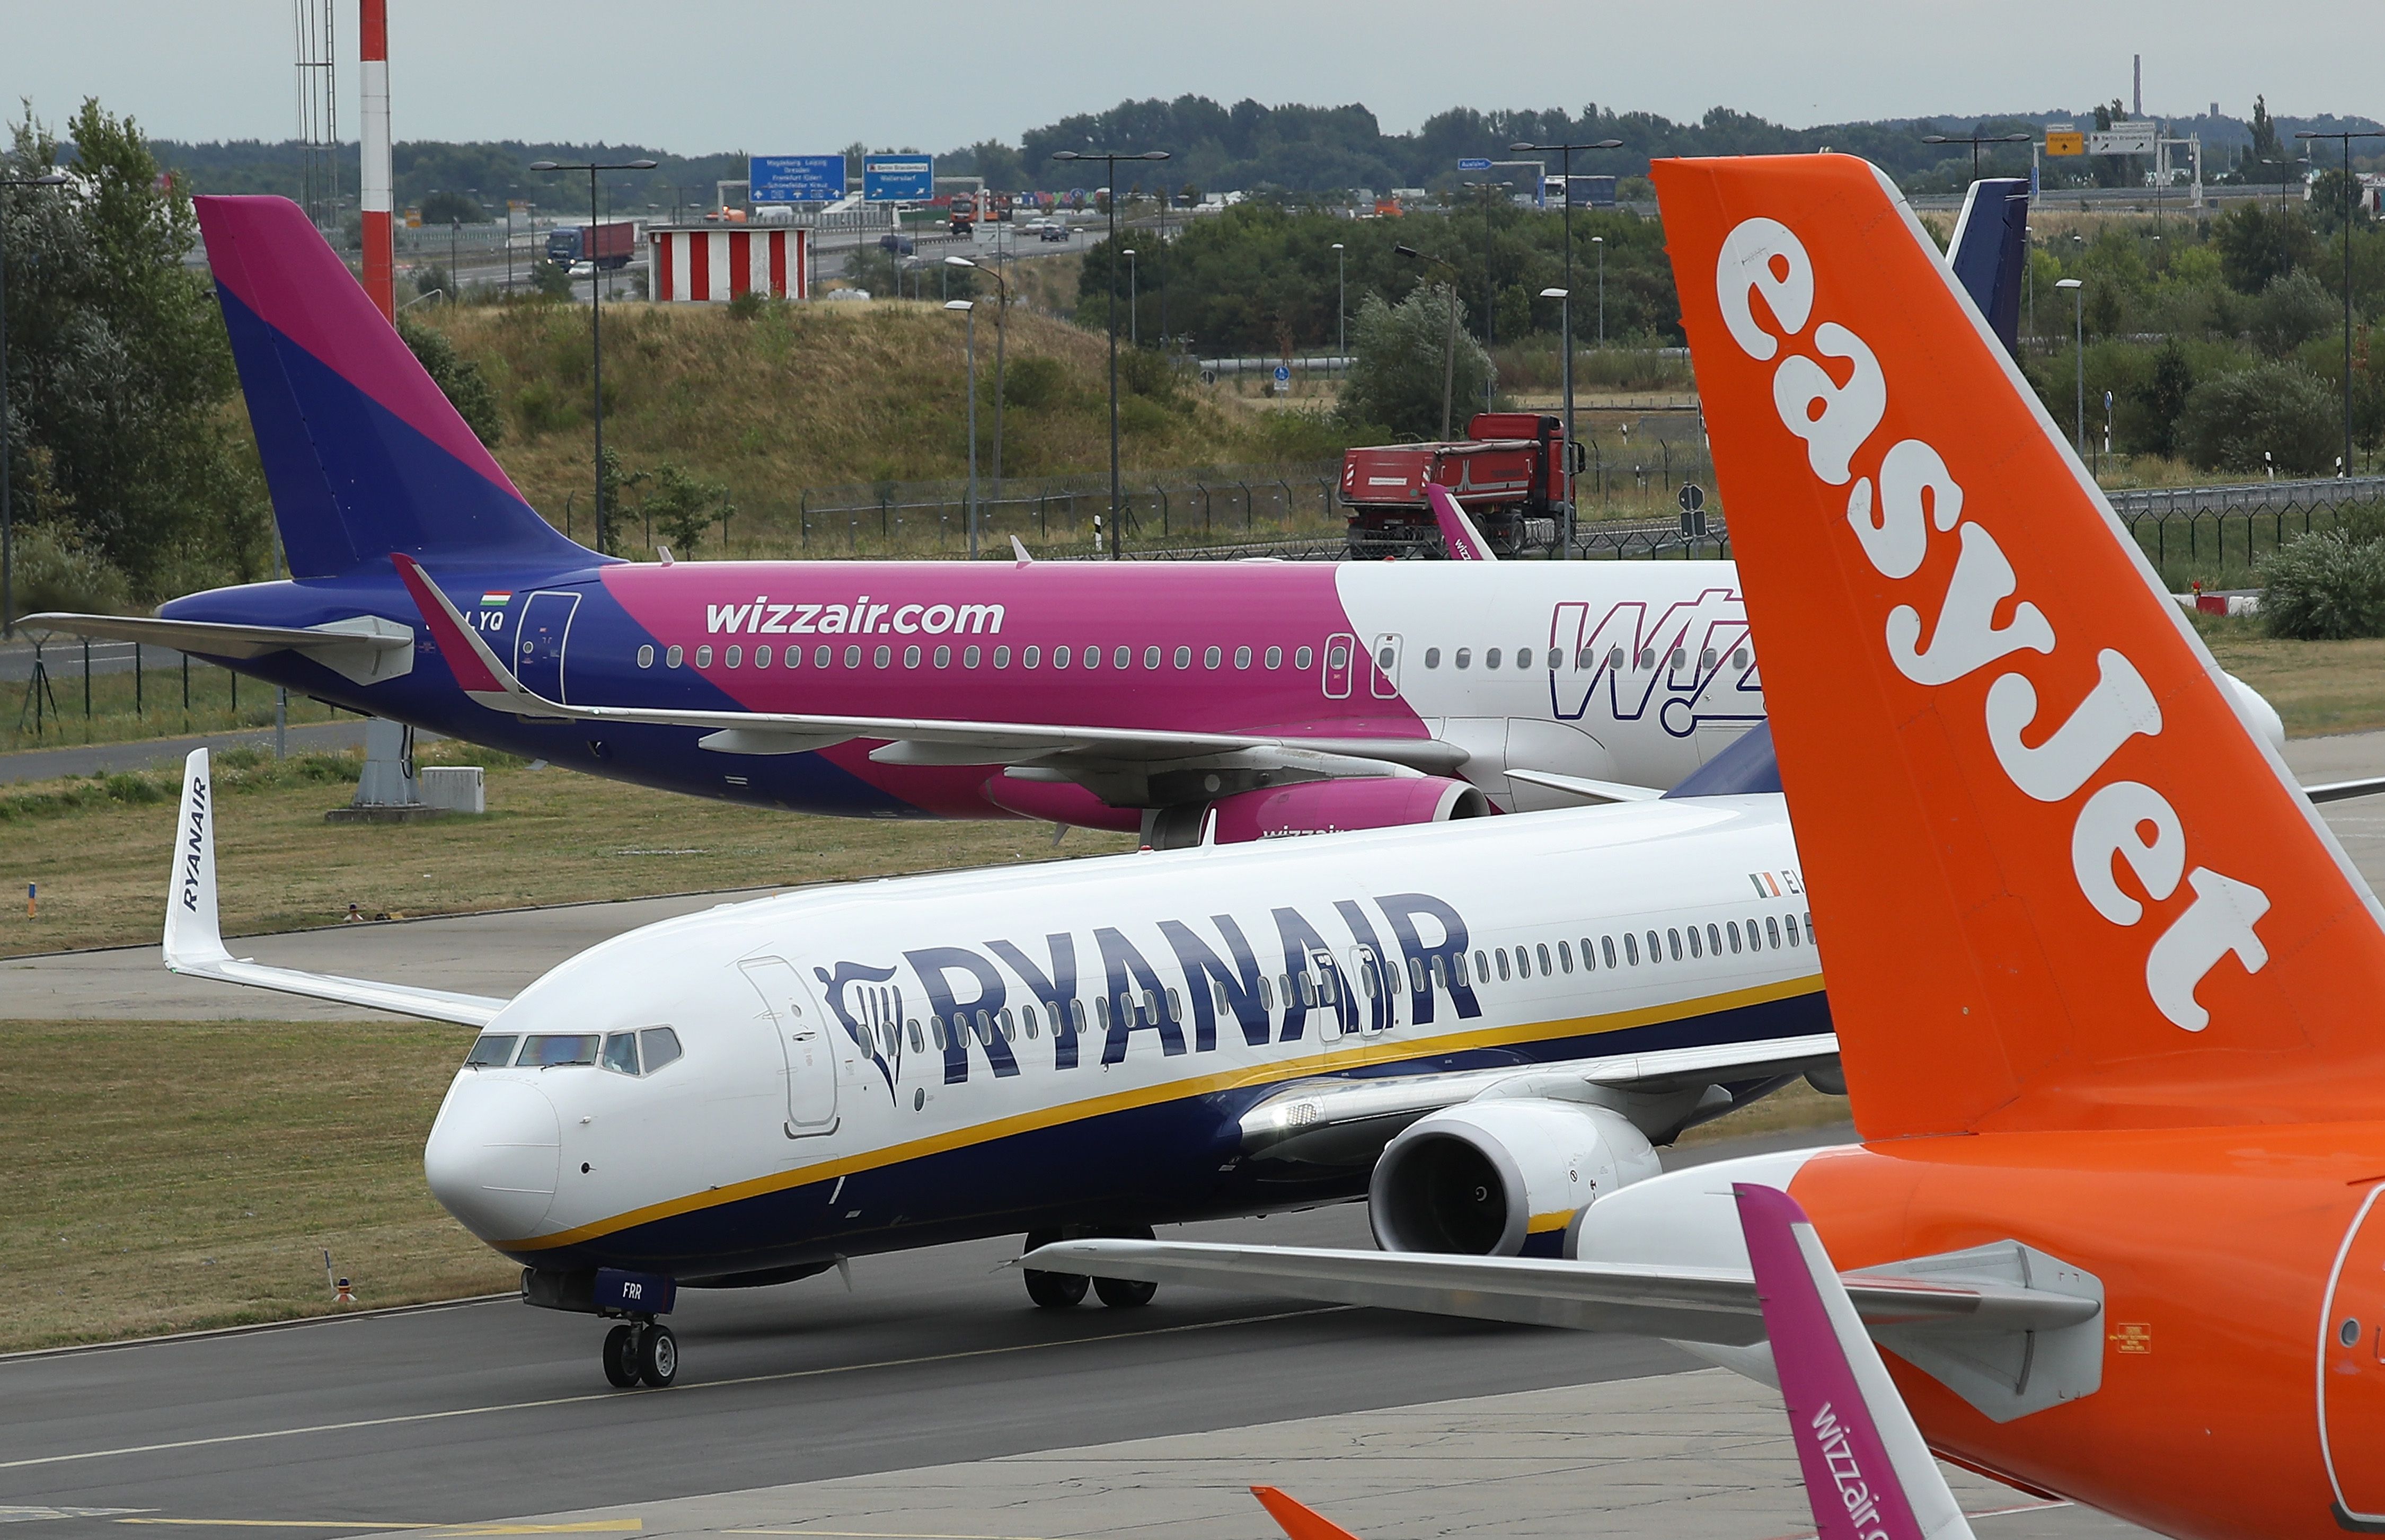 Ryanair WIzz and easyjet aircraft together on the apron